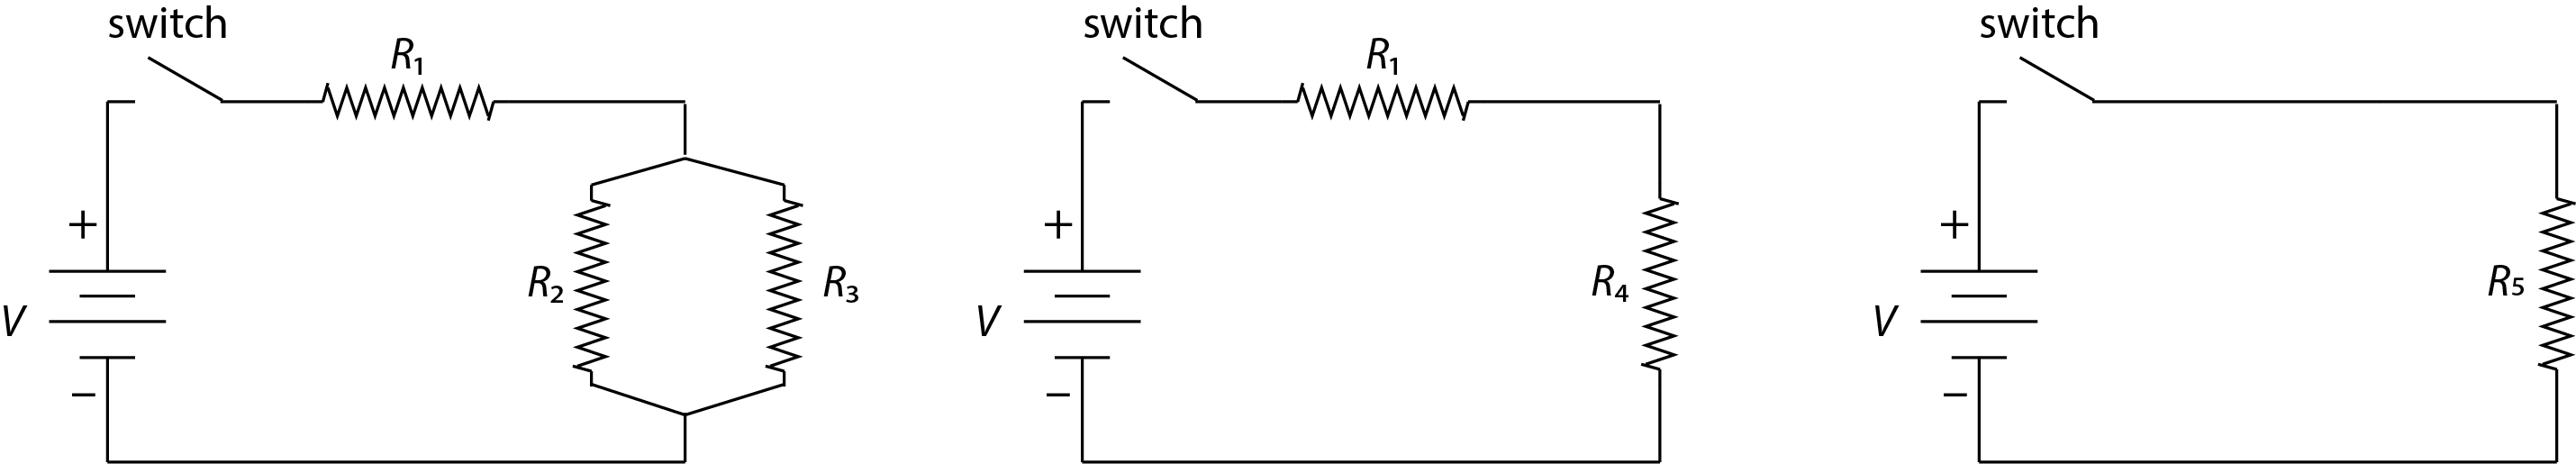 DC circuit with resistors in series and in parallel.